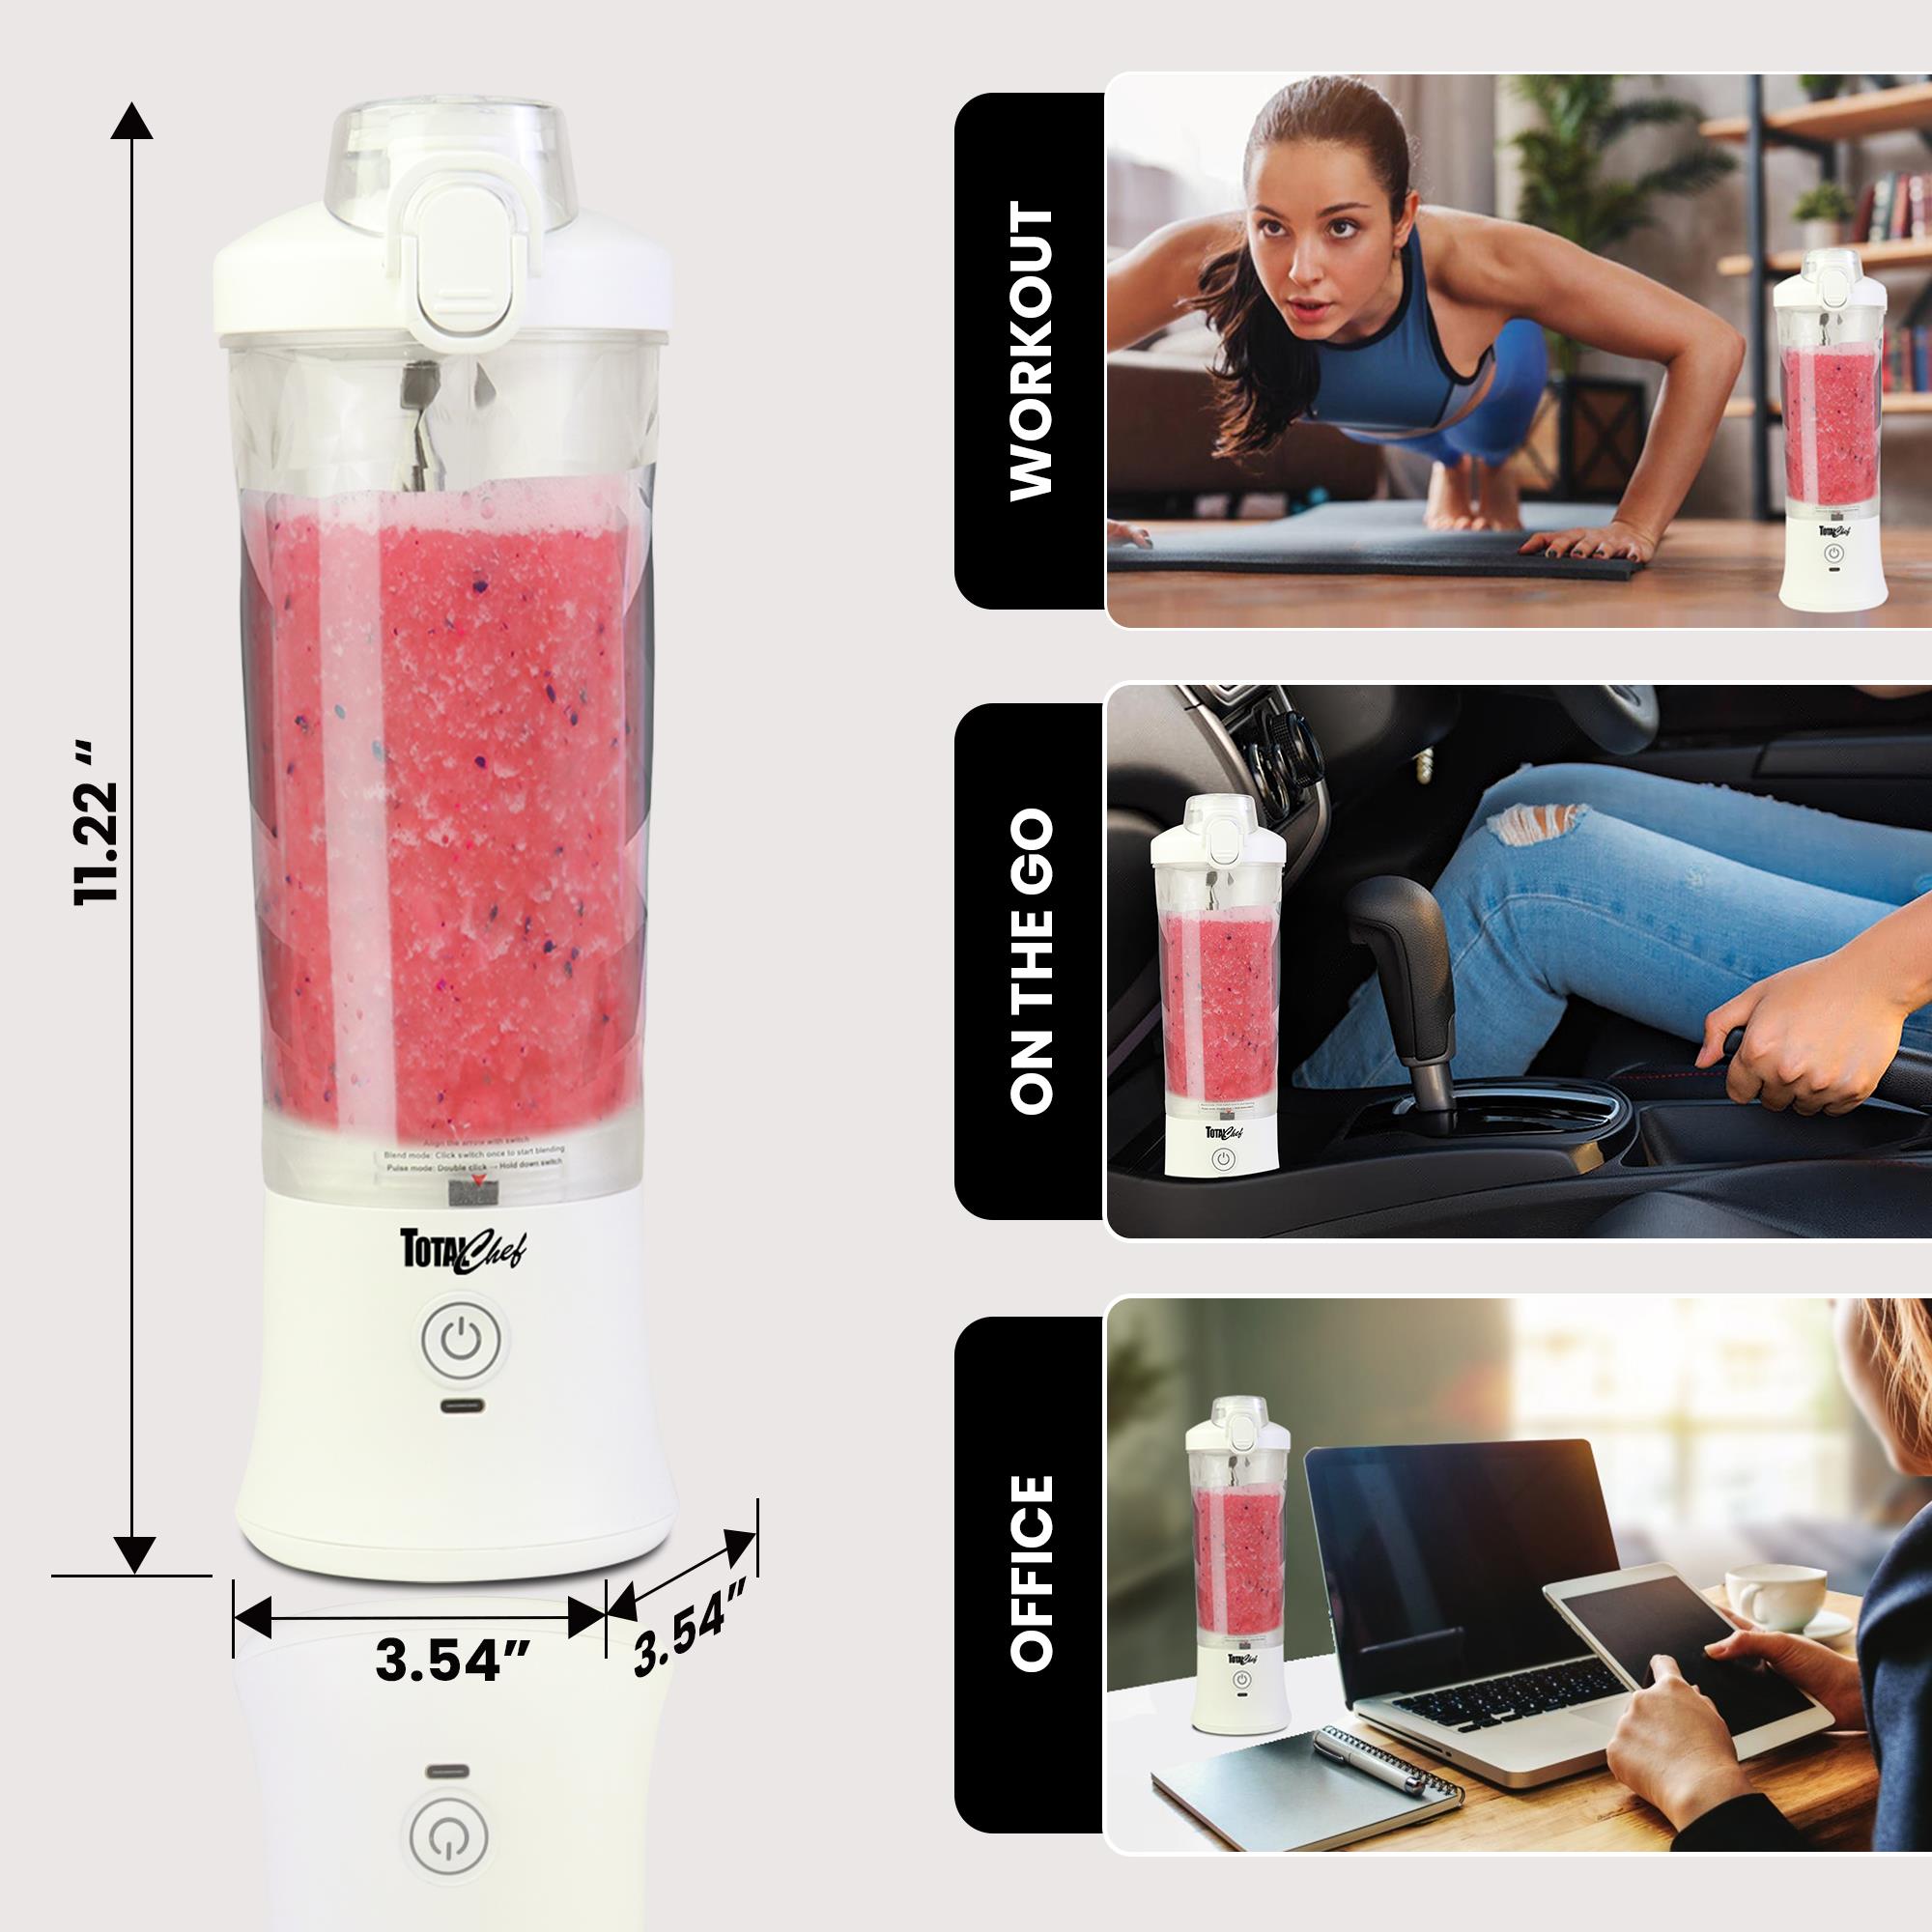 Bionic Blade Portable Blender - 18,000 RPM, USB Rechargeable